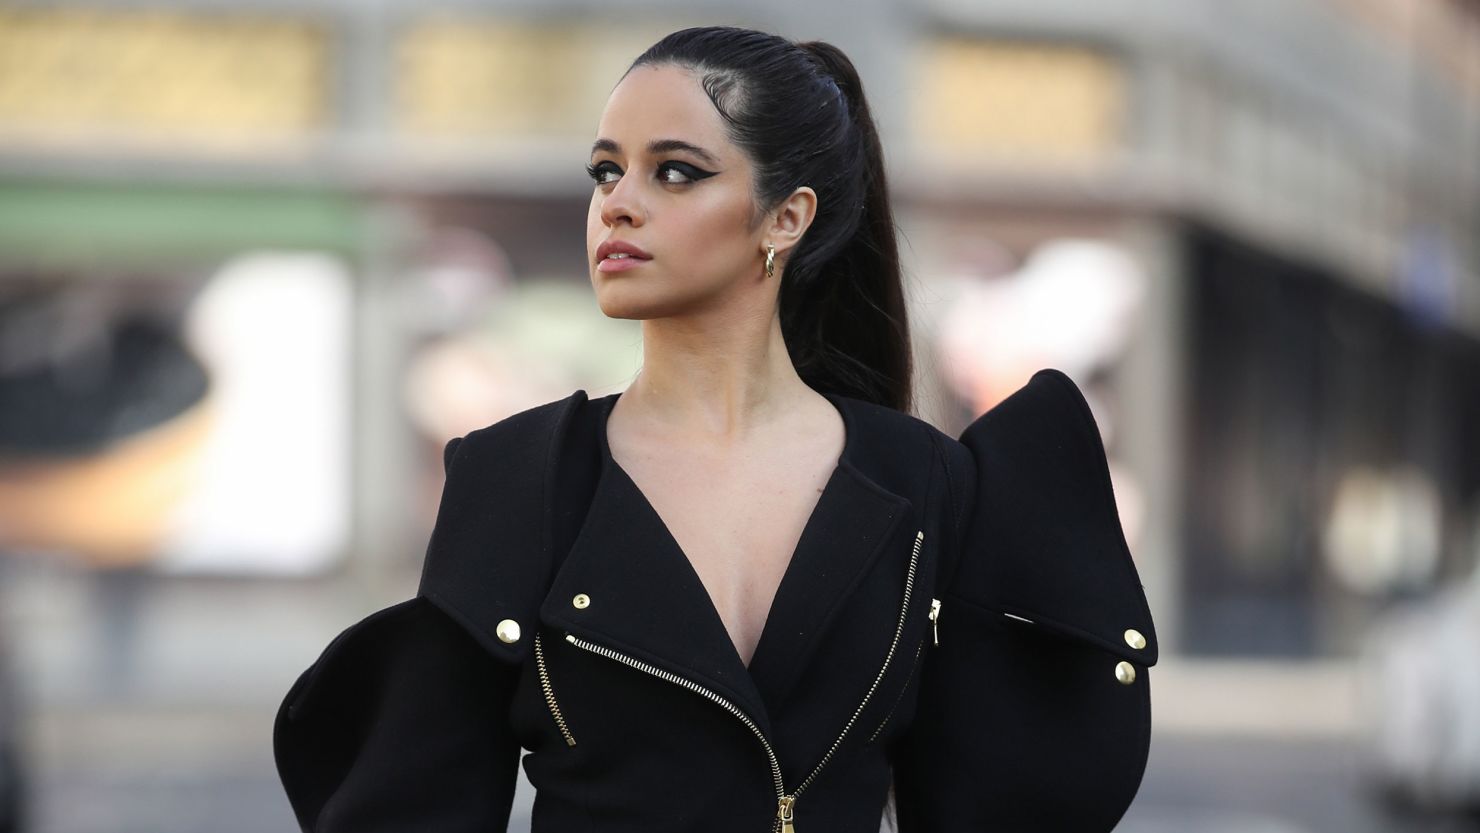 Camila Cabello opens up about body image struggles on Instagram | CNN